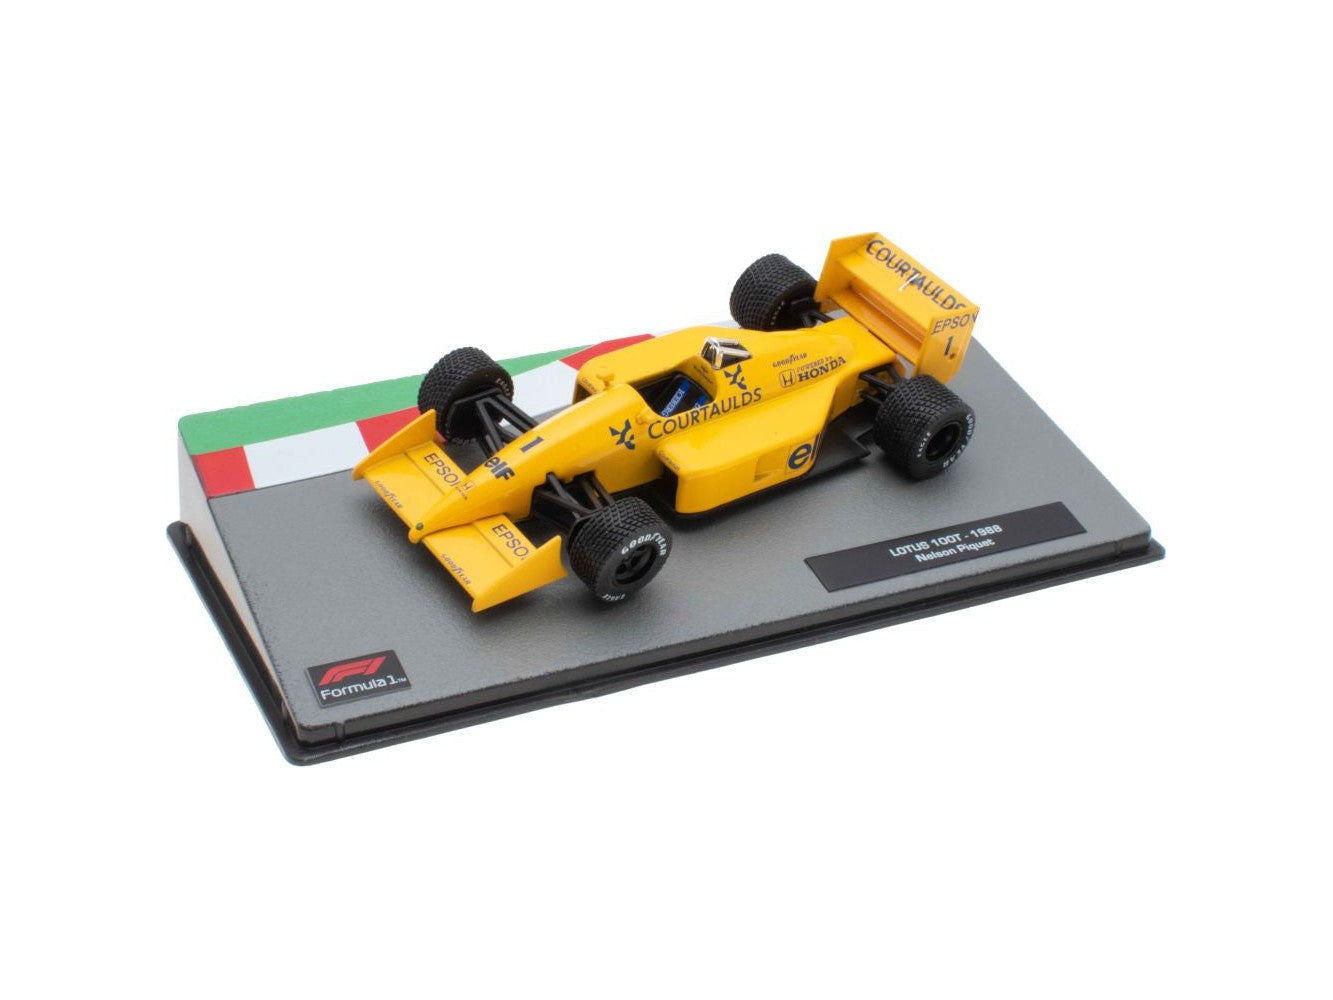 Deagostini Diecast 1:43 F1 Scale 2 Pack - Nelson Piquet and Gilles